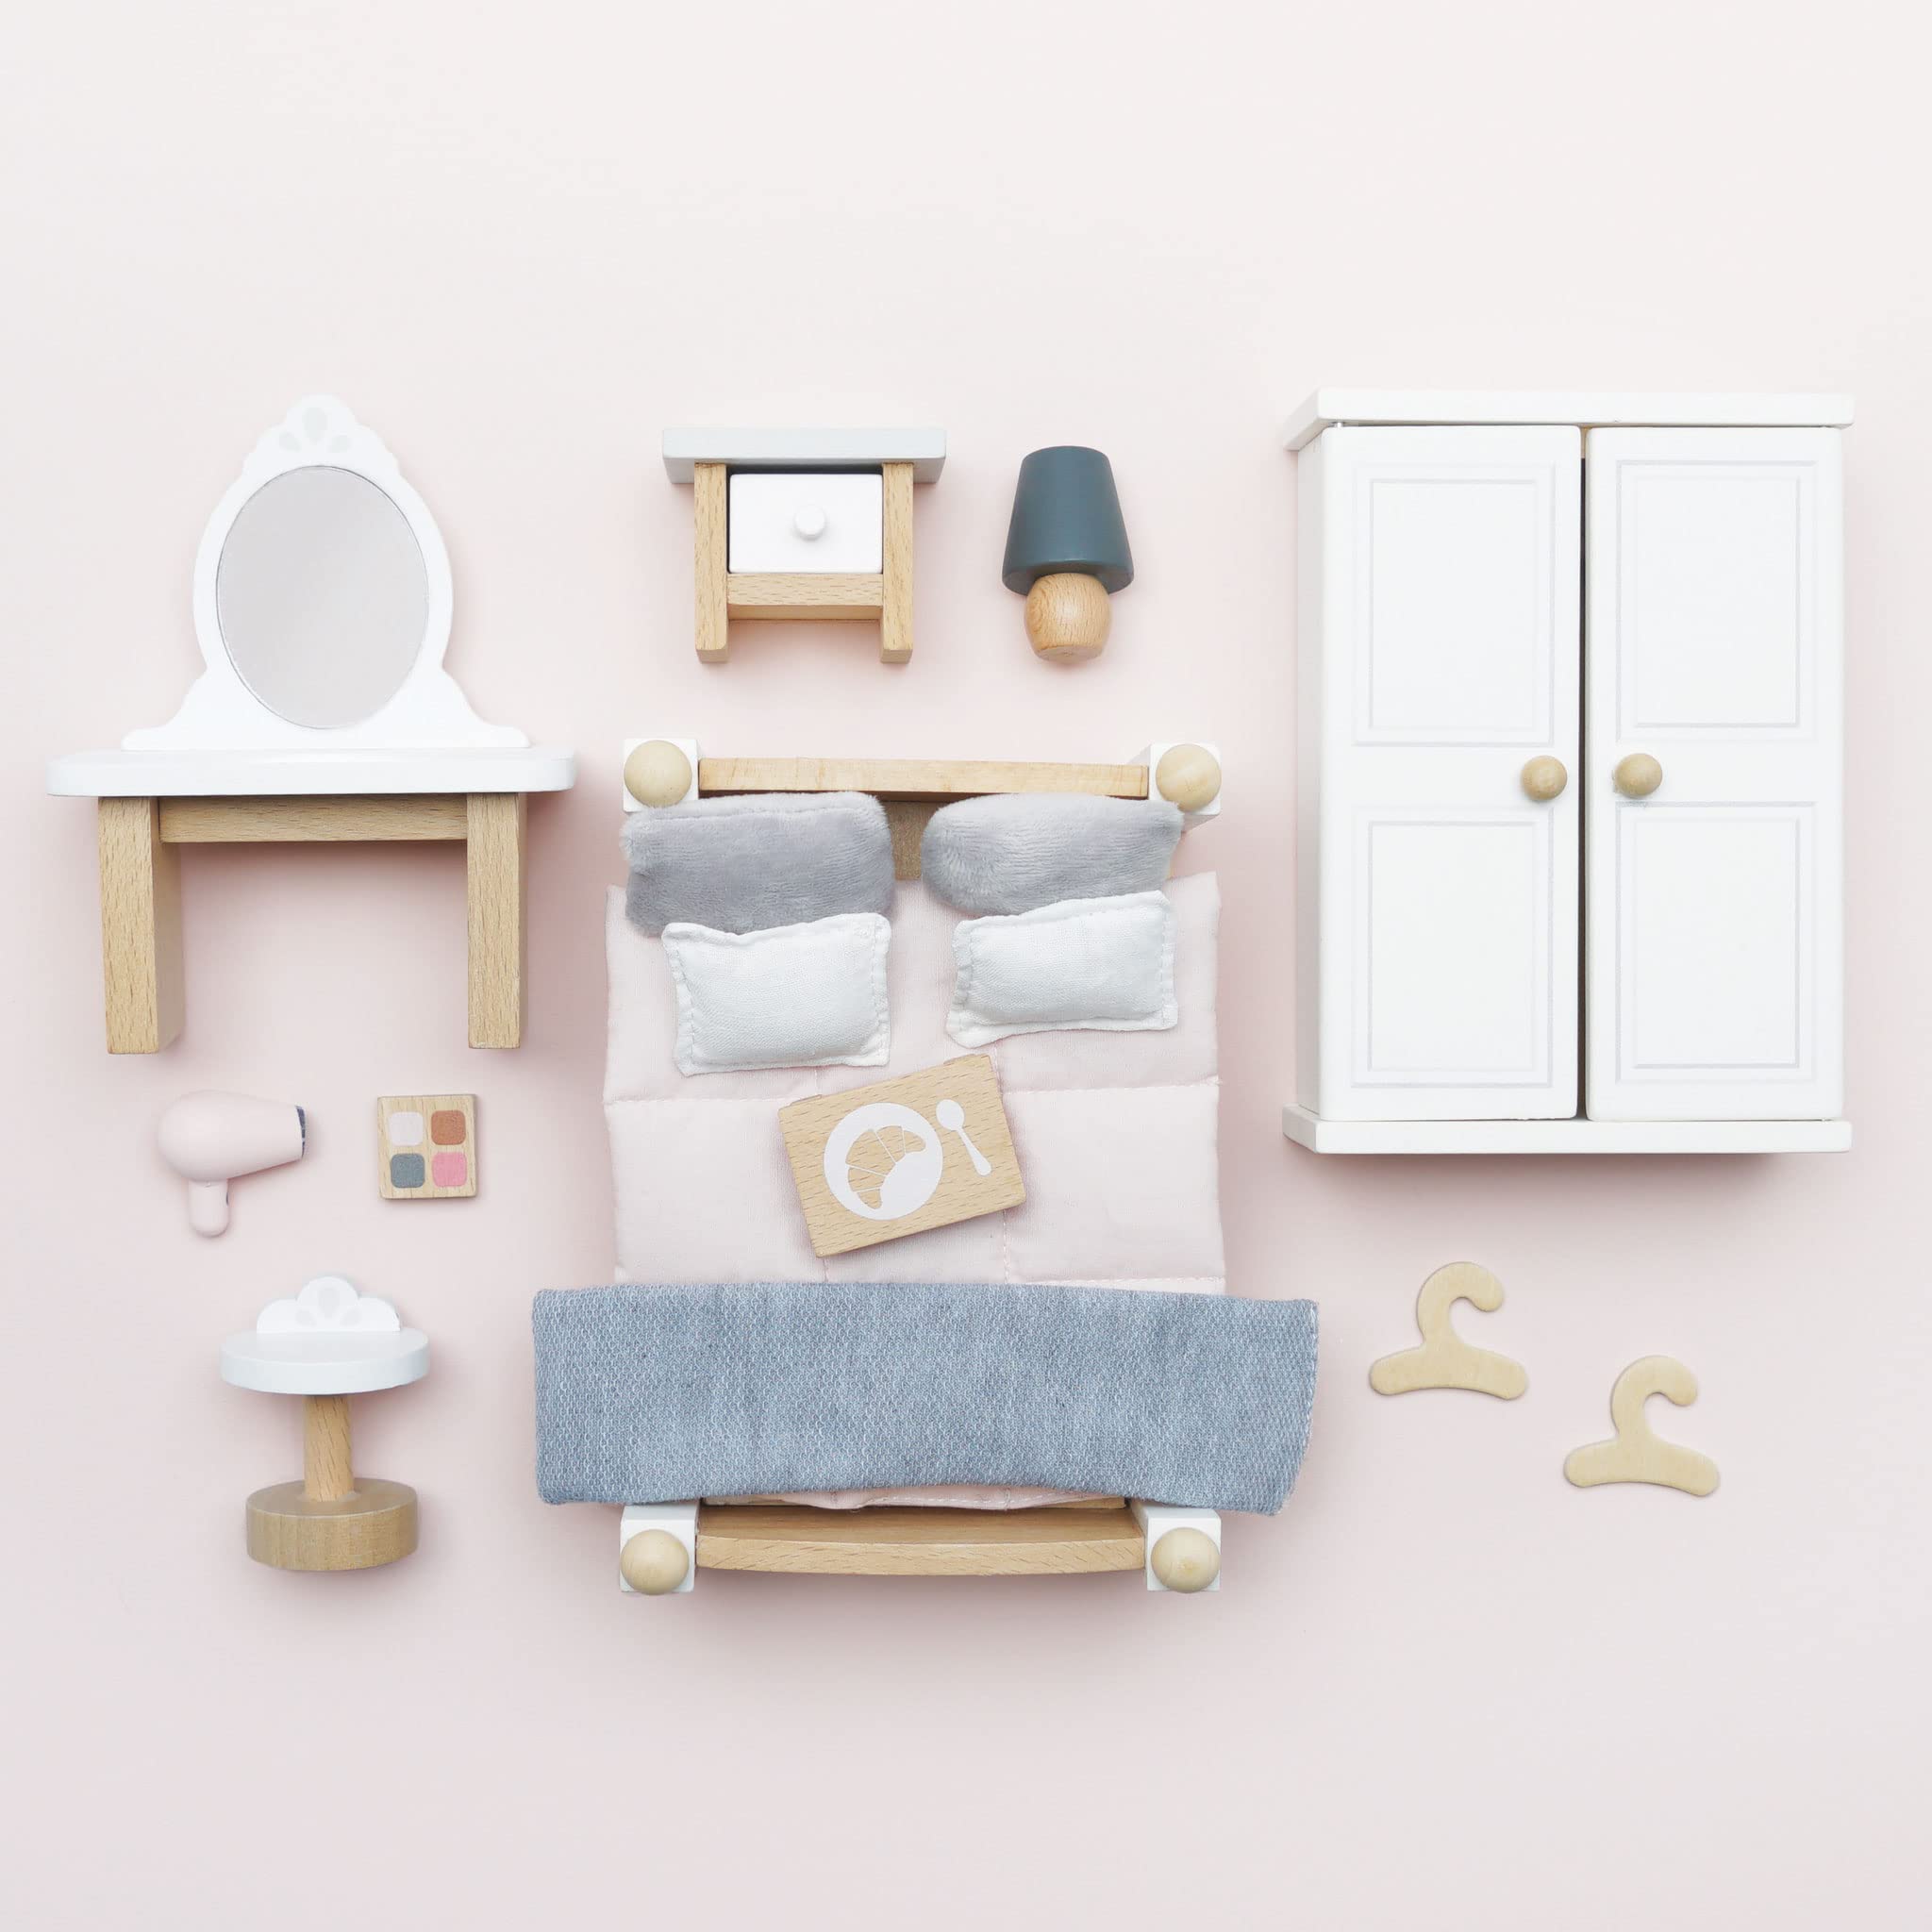 Le Toy Van - Wooden Daisylane Master Bedroom Dolls House | Accessories Play Set For Dolls Houses | Girls and Boys Dolls House Furniture Sets - Suitable For Ages 3+, ME057, Small